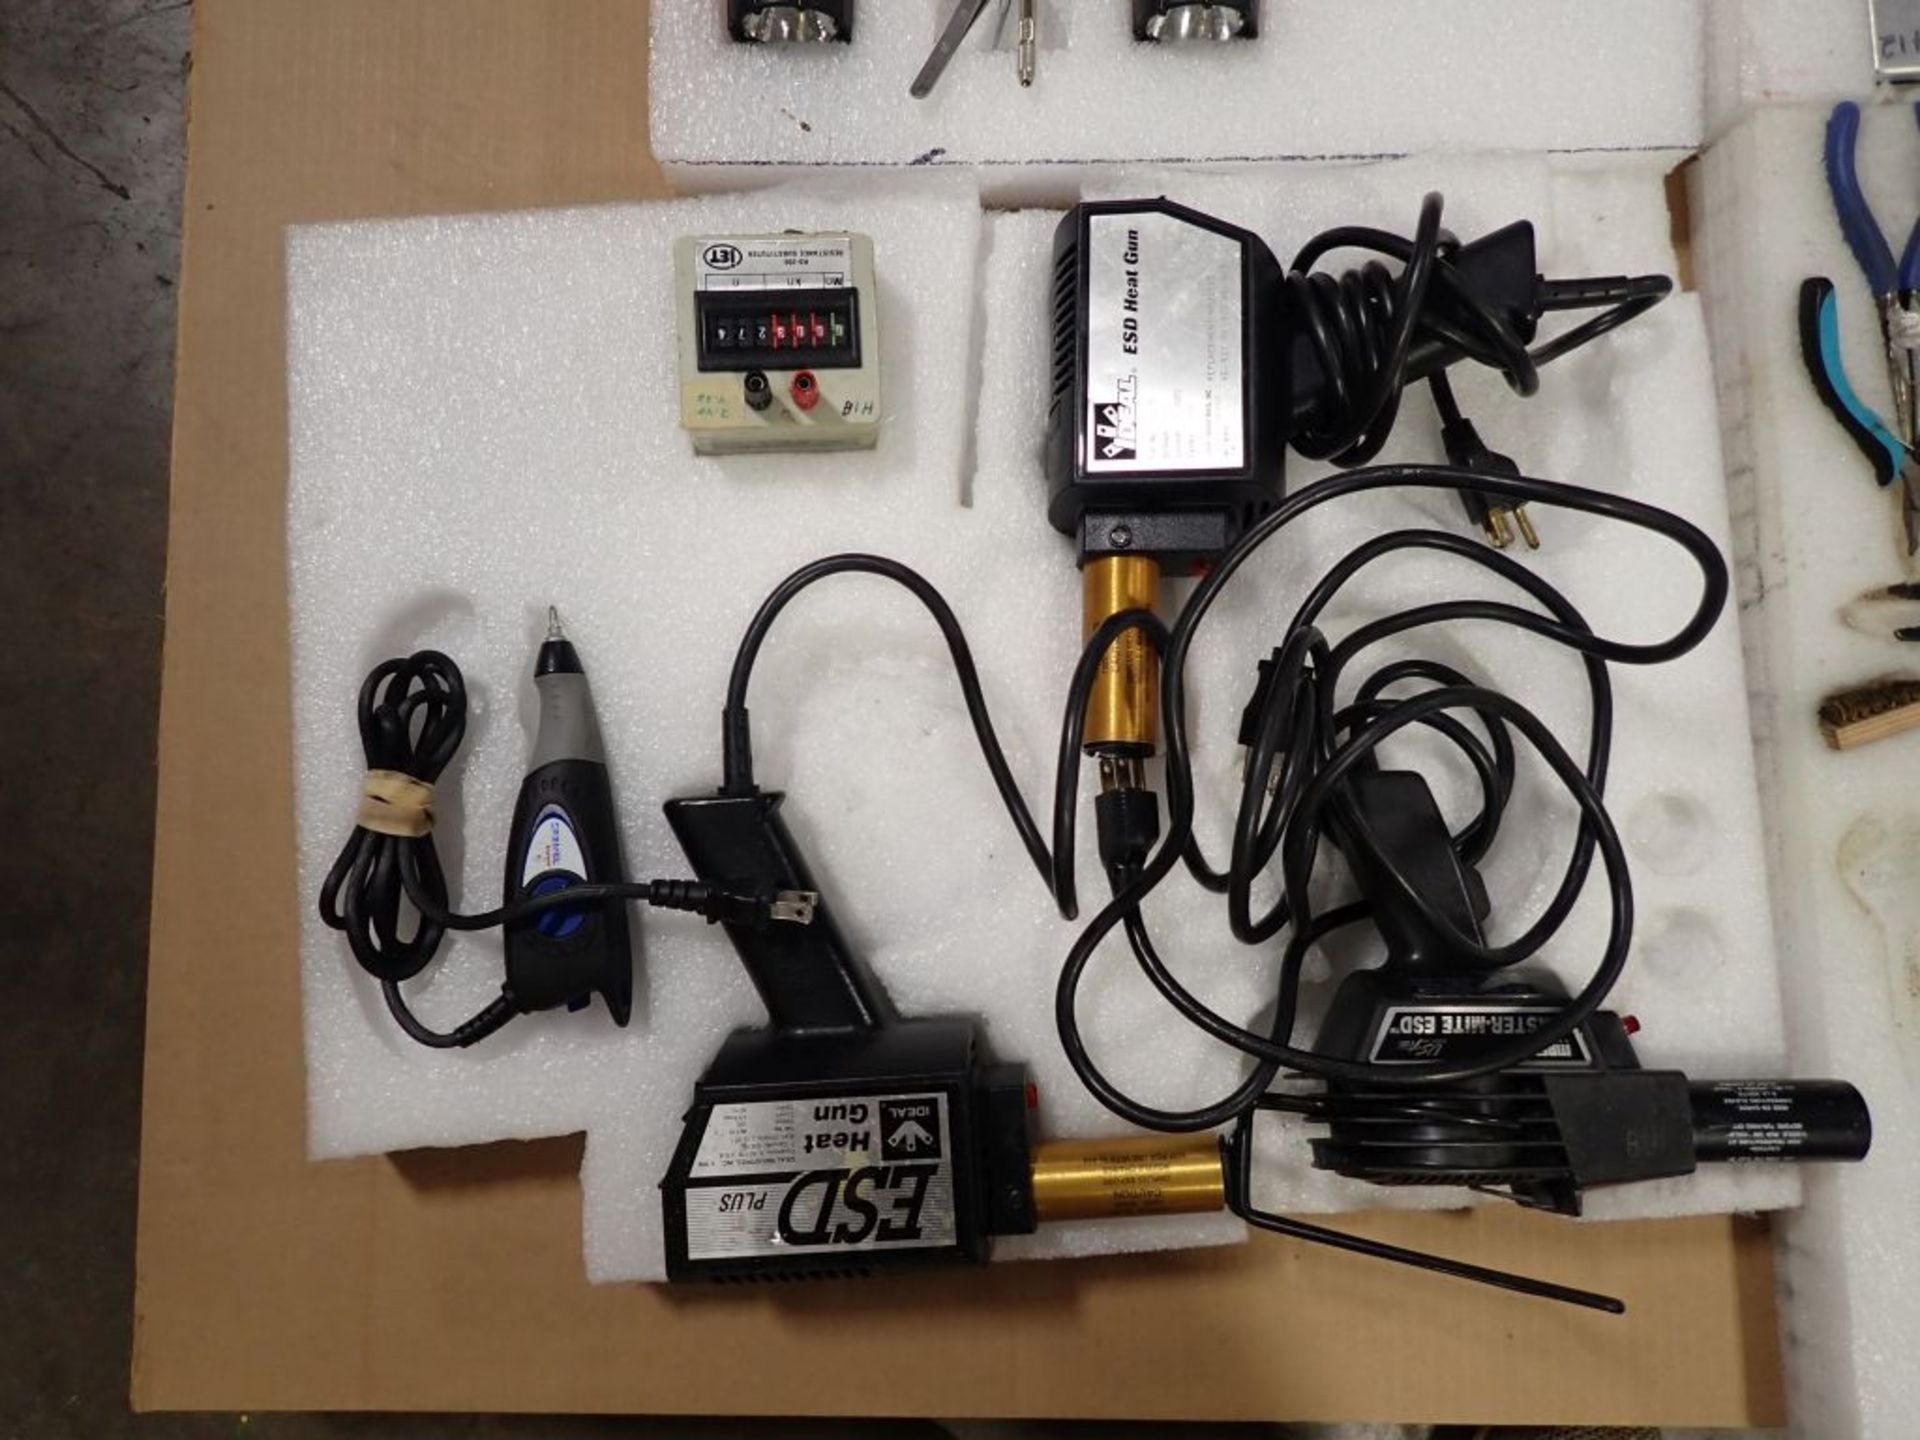 Lot of Assorted Tools & Flashlights | Tag: 241442 | Limited Forklift Assistance Available - $10.00 - Image 5 of 5